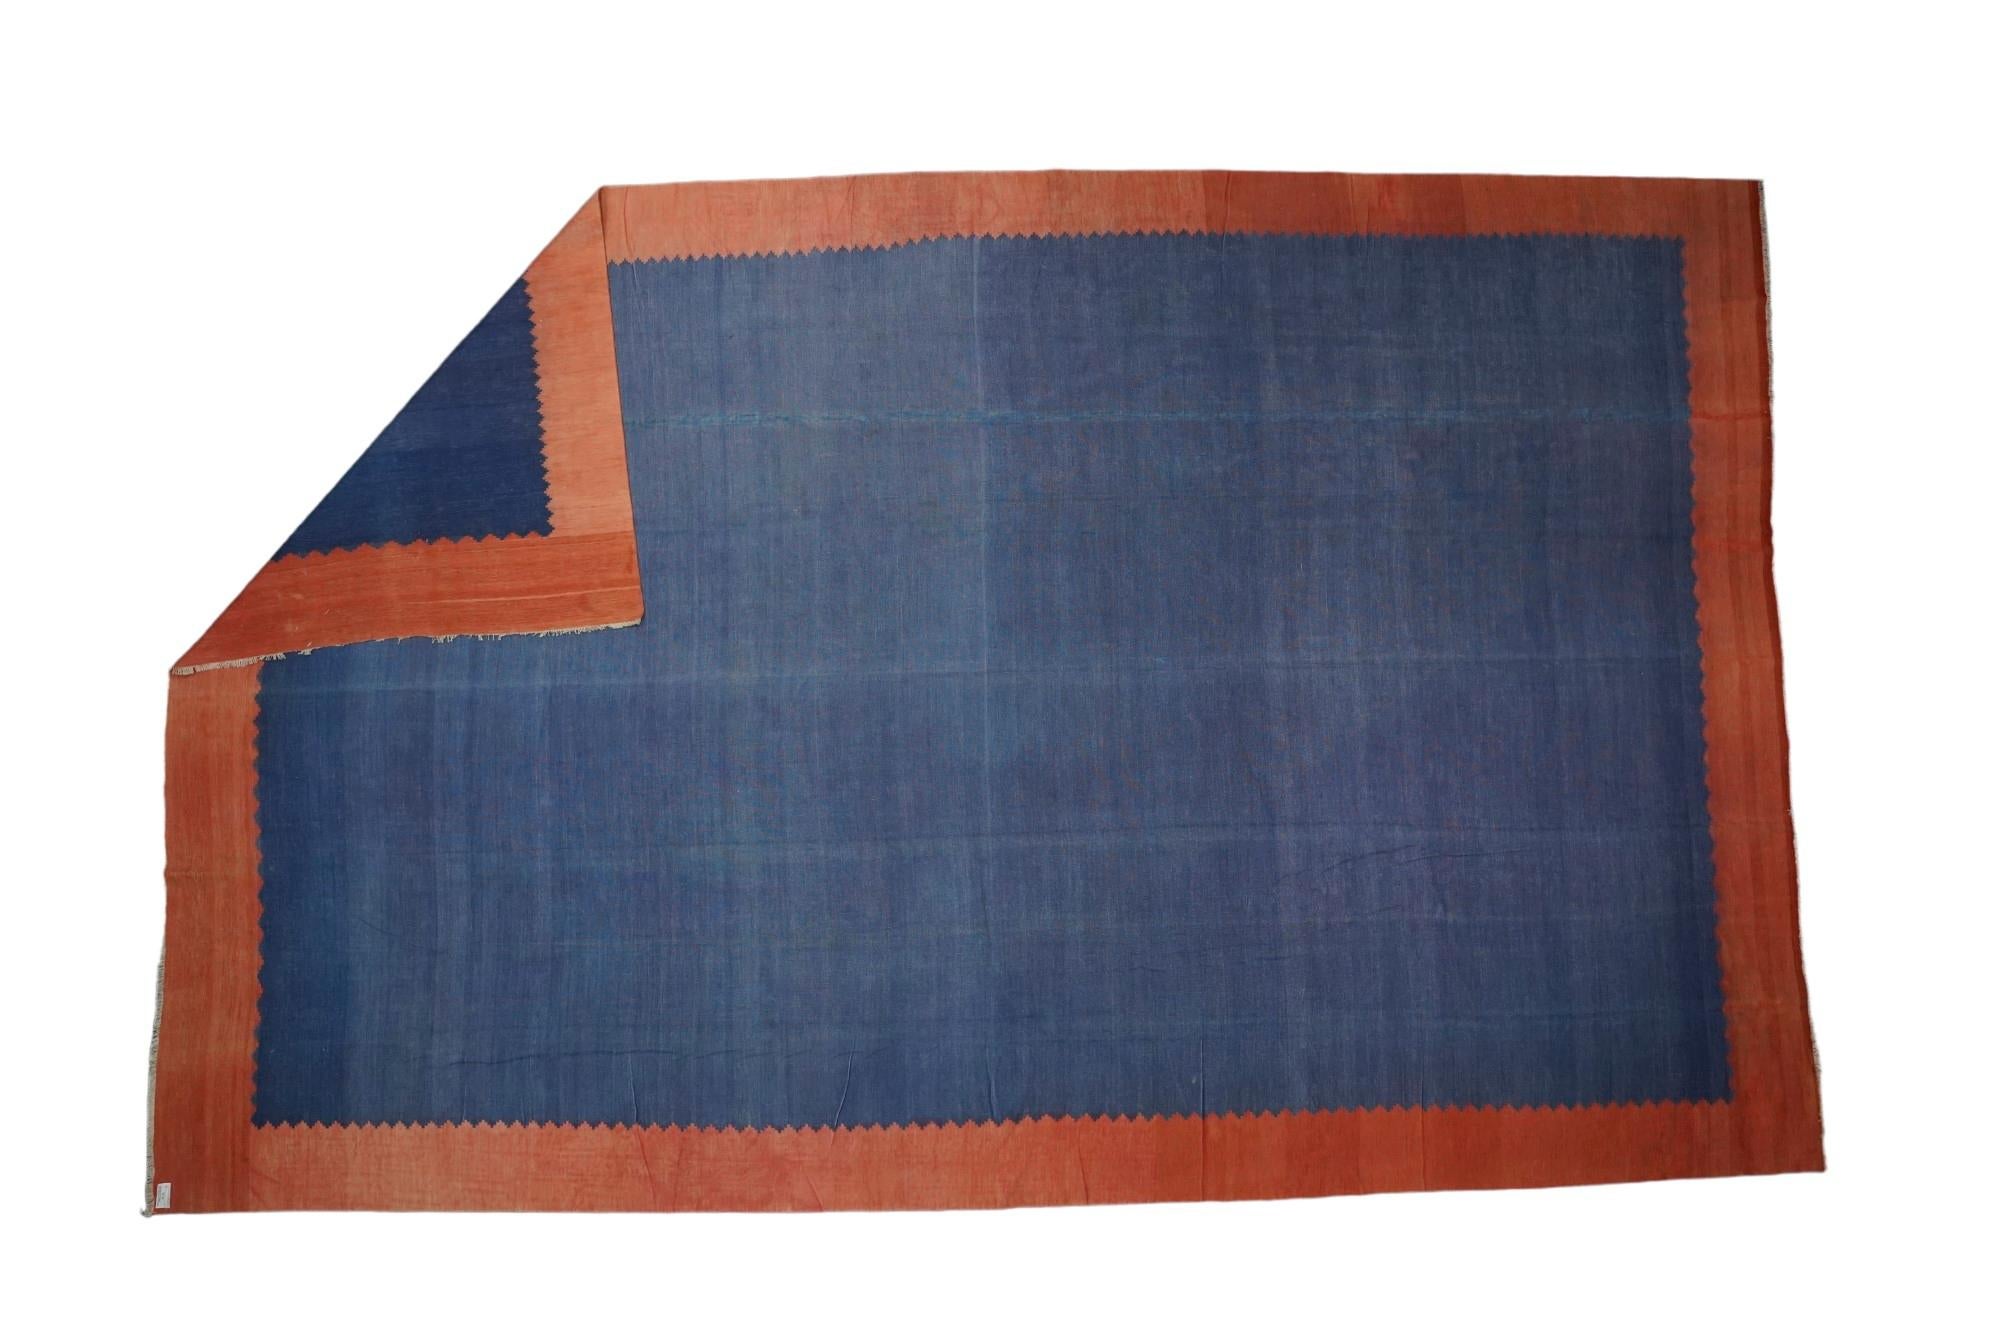 This 11x16 rug is a rare vintage Dhurrie rug from an exciting new mid-century curation by Rug & Kilim. Handwoven in a wool flatweave, it originates from India circa 1950-1960, and enjoys a blue open field and solid red border. 

On the Design: